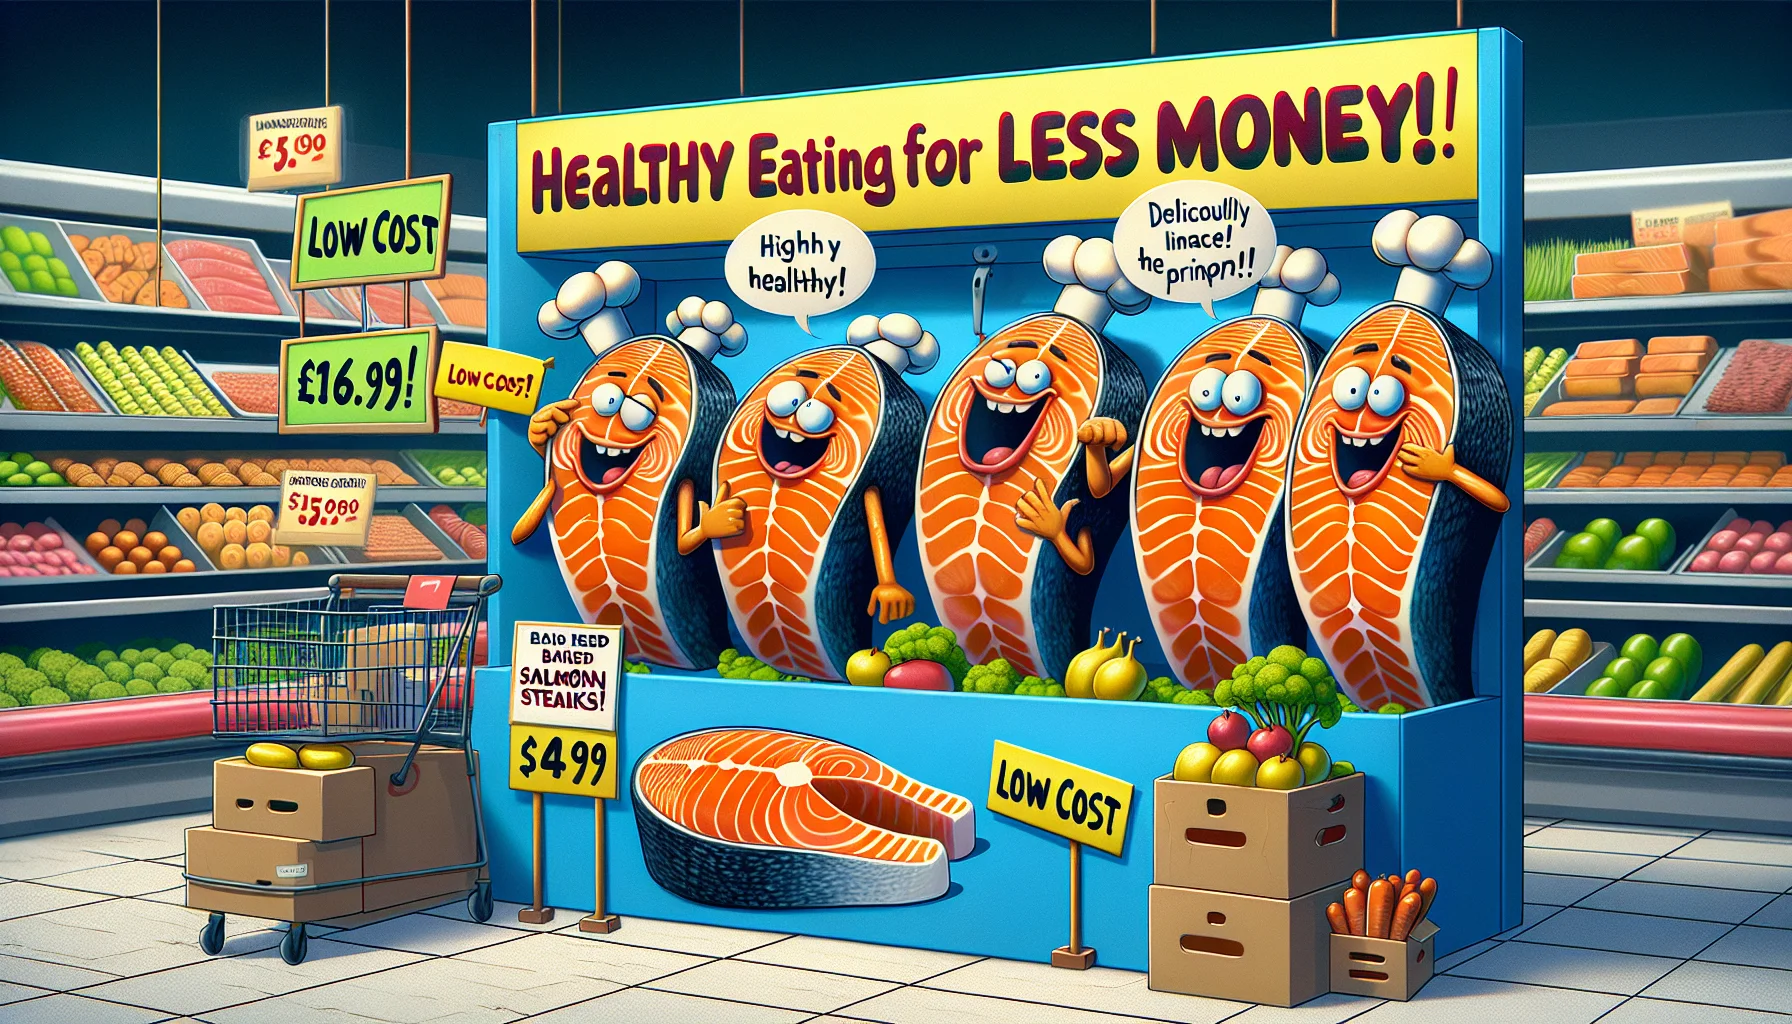 Imagine a humorous scene in a grocery store. A large colorful sign promoting 'Healthy Eating for Less Money' is visible overhead. Beneath it is a cartoonish stand with baked salmon steaks showcasing themselves humorously. They're striking goofy poses as if they're convincing customers about their benefits. Each salmon steak wears a tiny chef's hat and holds little banners saying, 'Low Cost!', 'High in Proteins!', and 'Deliciously Healthy!' The delightful smell of the cooked salmon wafts through the store, attracting customers. Final touch, a price tag showing an affordable price hanging off the corner of the stand.